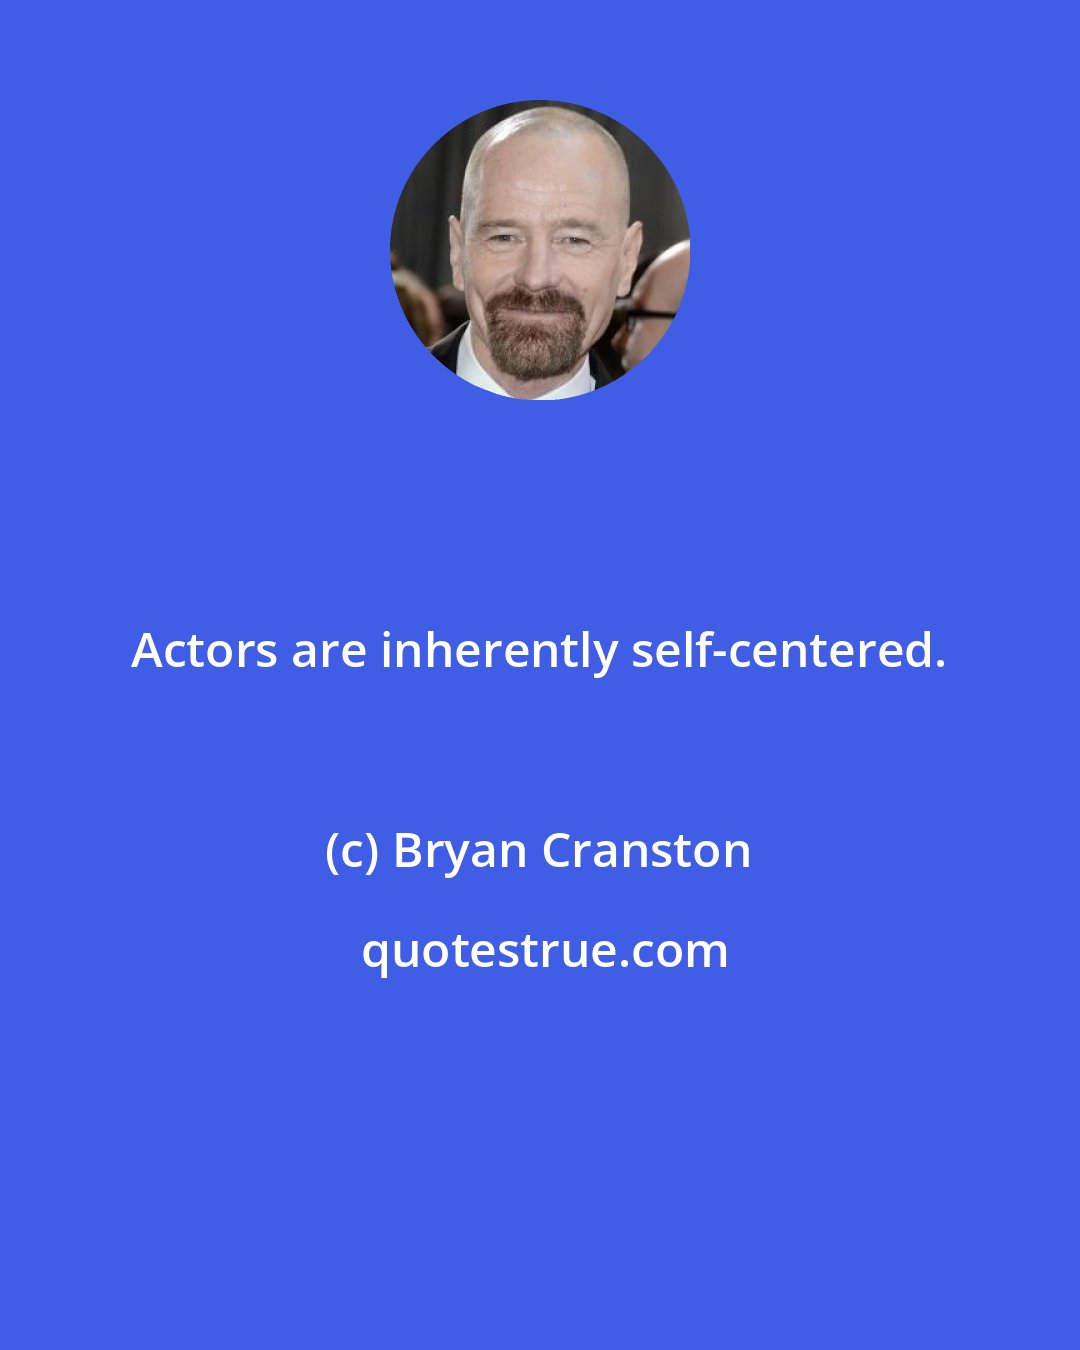 Bryan Cranston: Actors are inherently self-centered.